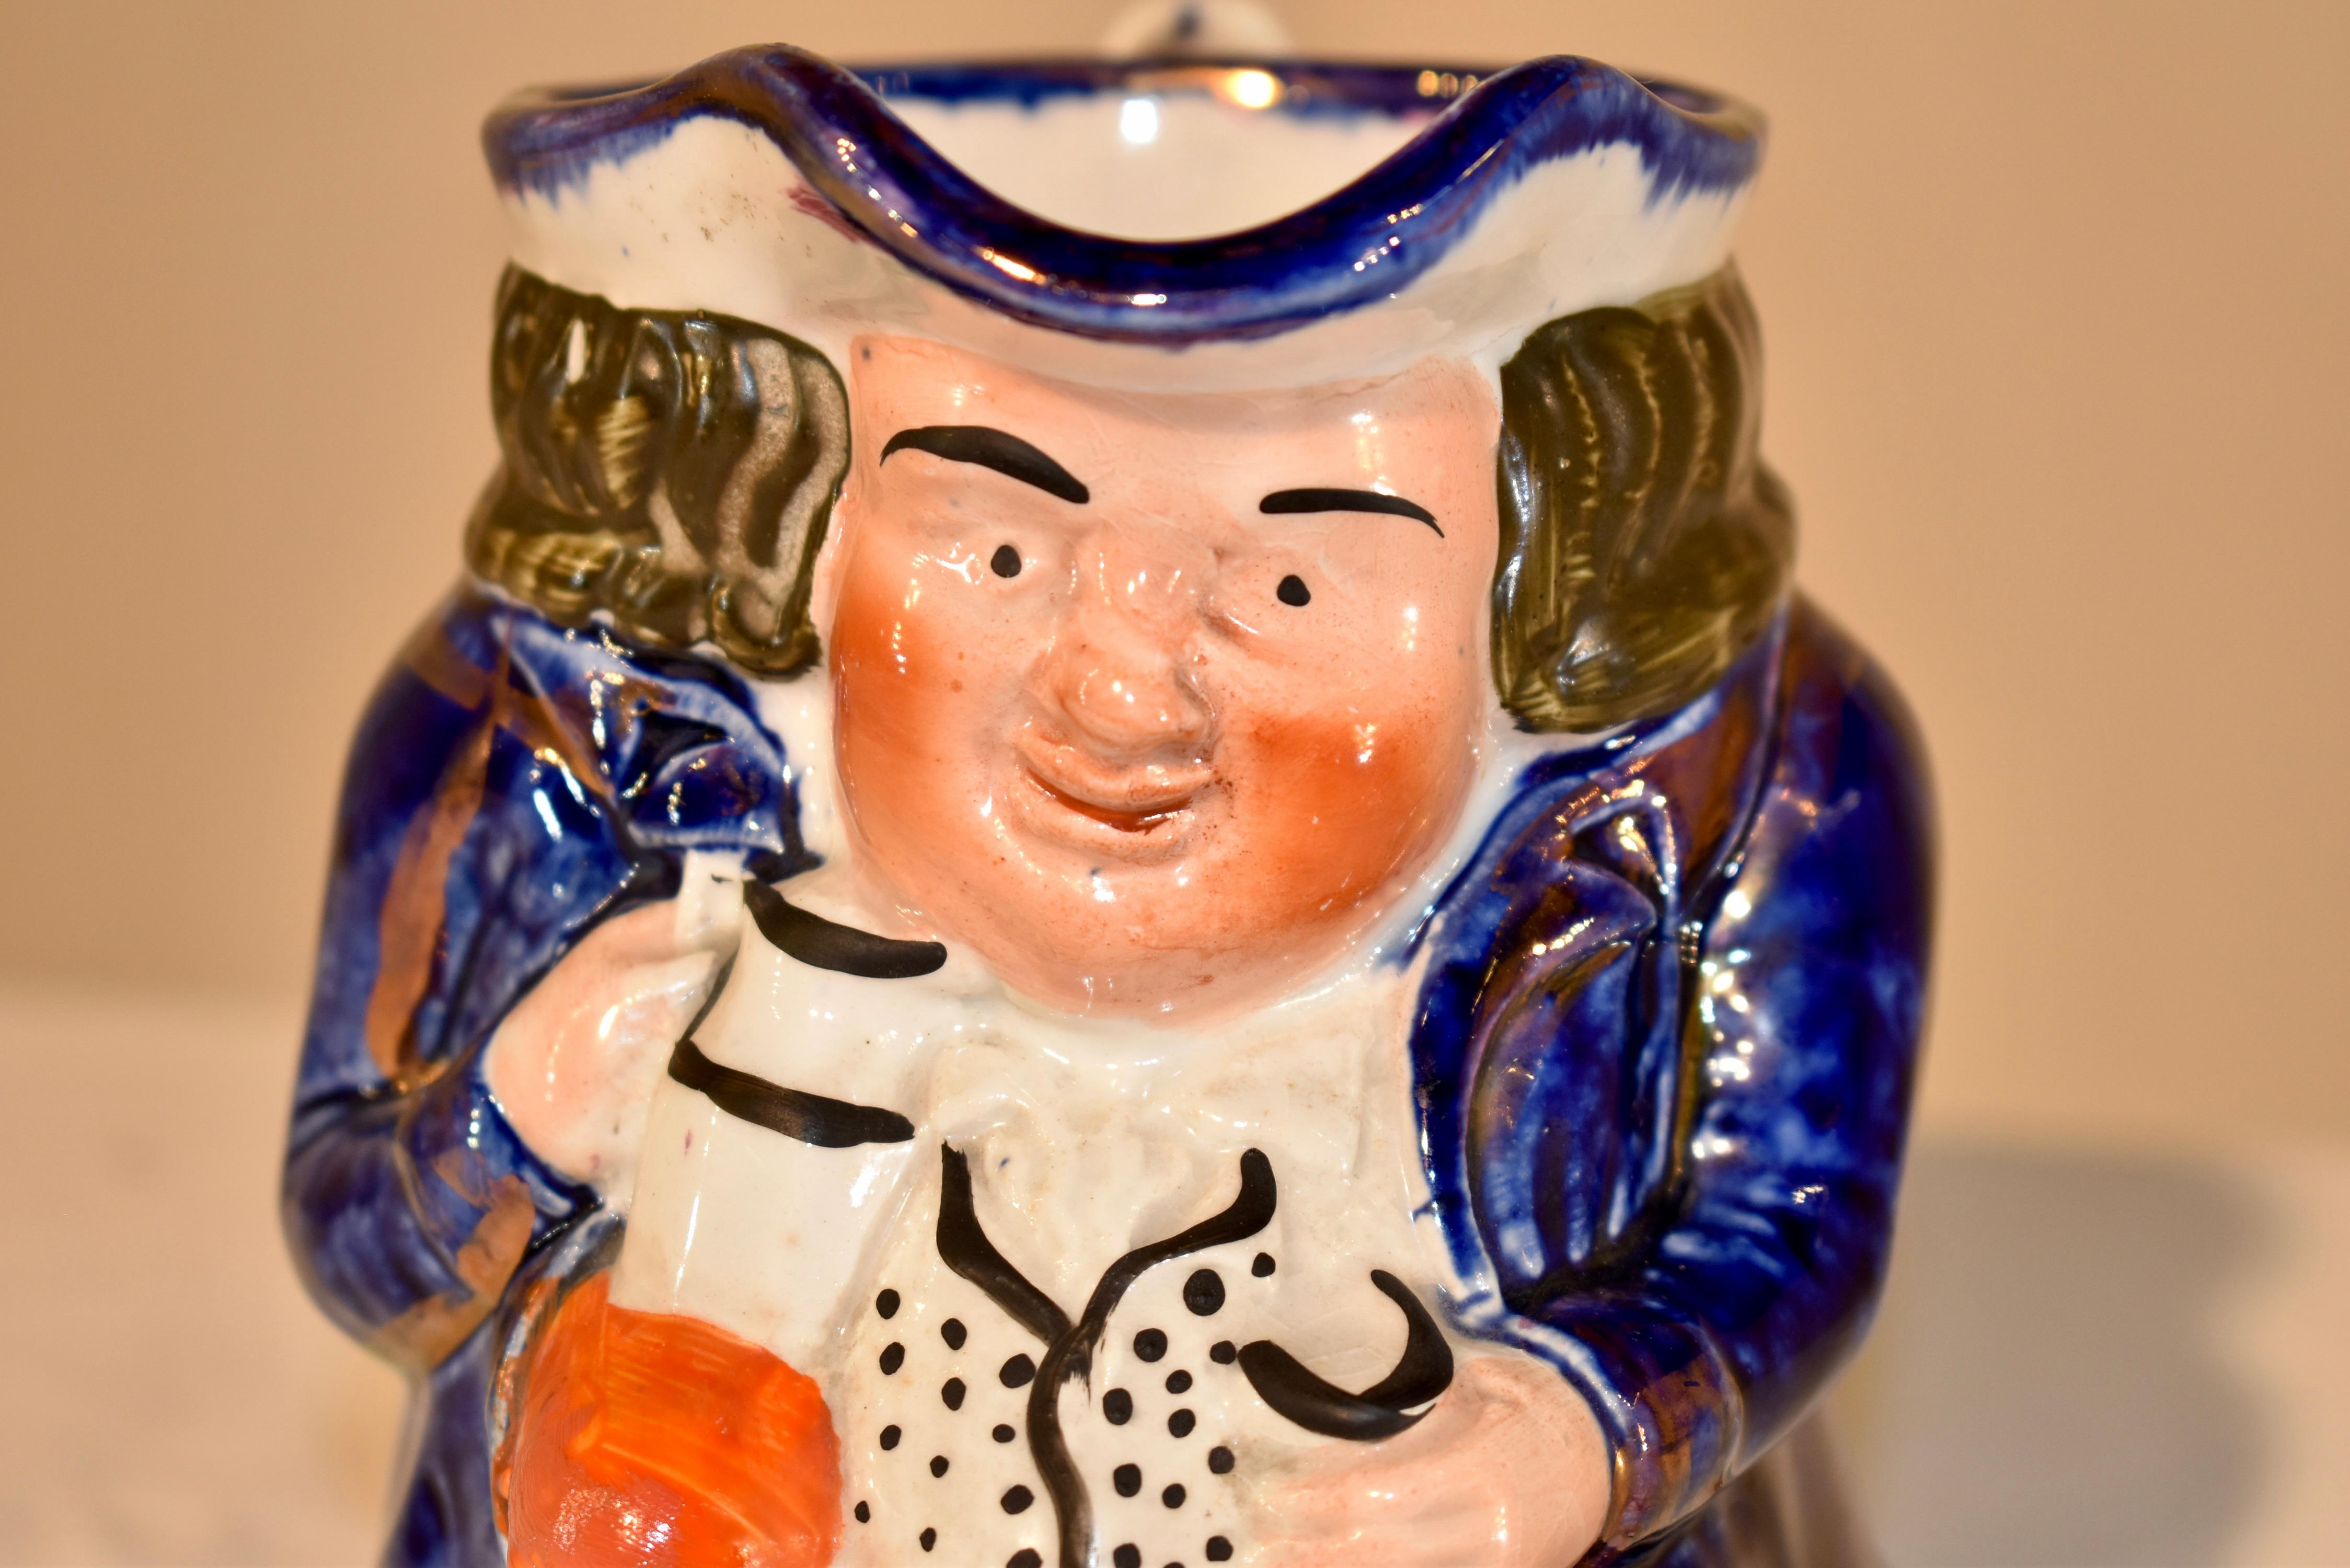 19th century ceramic Toby jug from the Staffordshire region of England.  He has a blue jacket and a warm expression on his face.  The jug has copper lustre accents as well for added definition.  